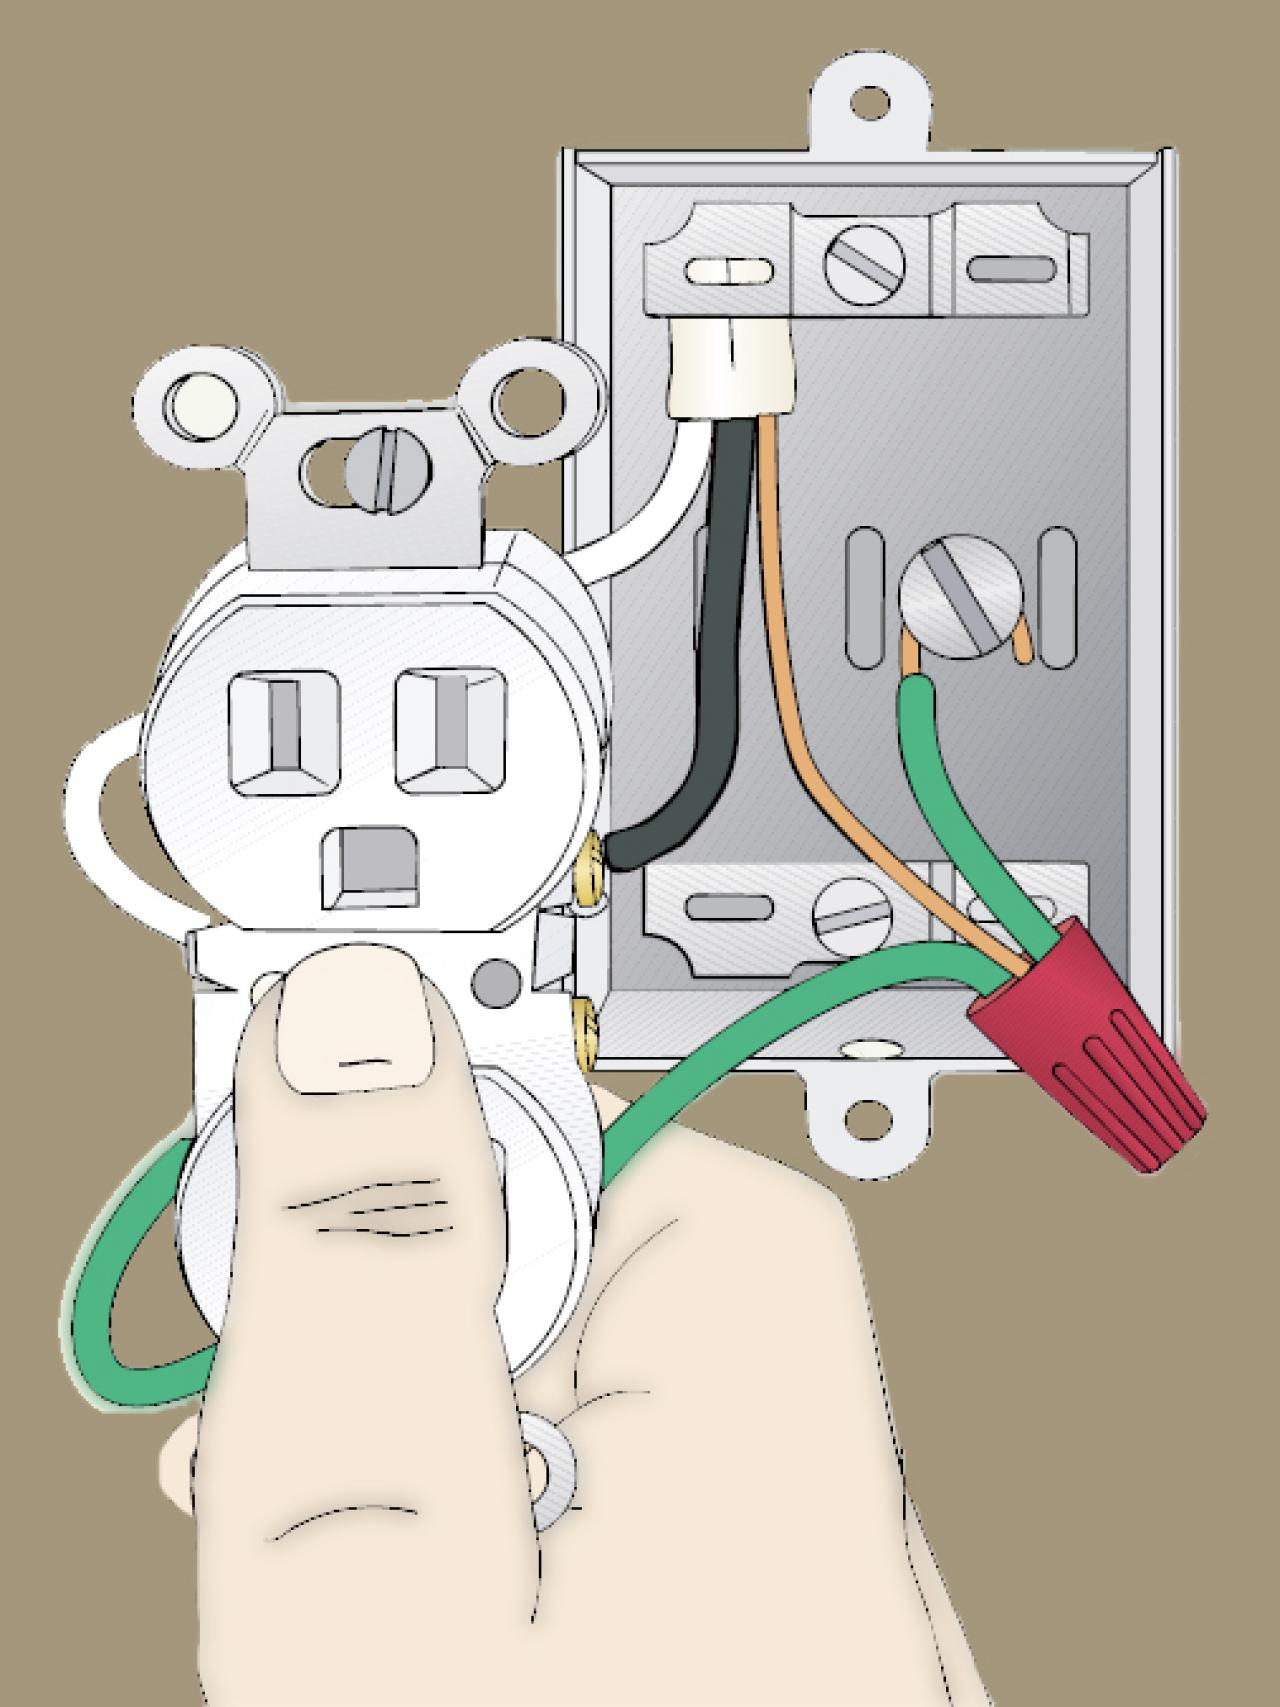 The Diffe Colored Electrical Wires, How To Basic Electrical Wiring